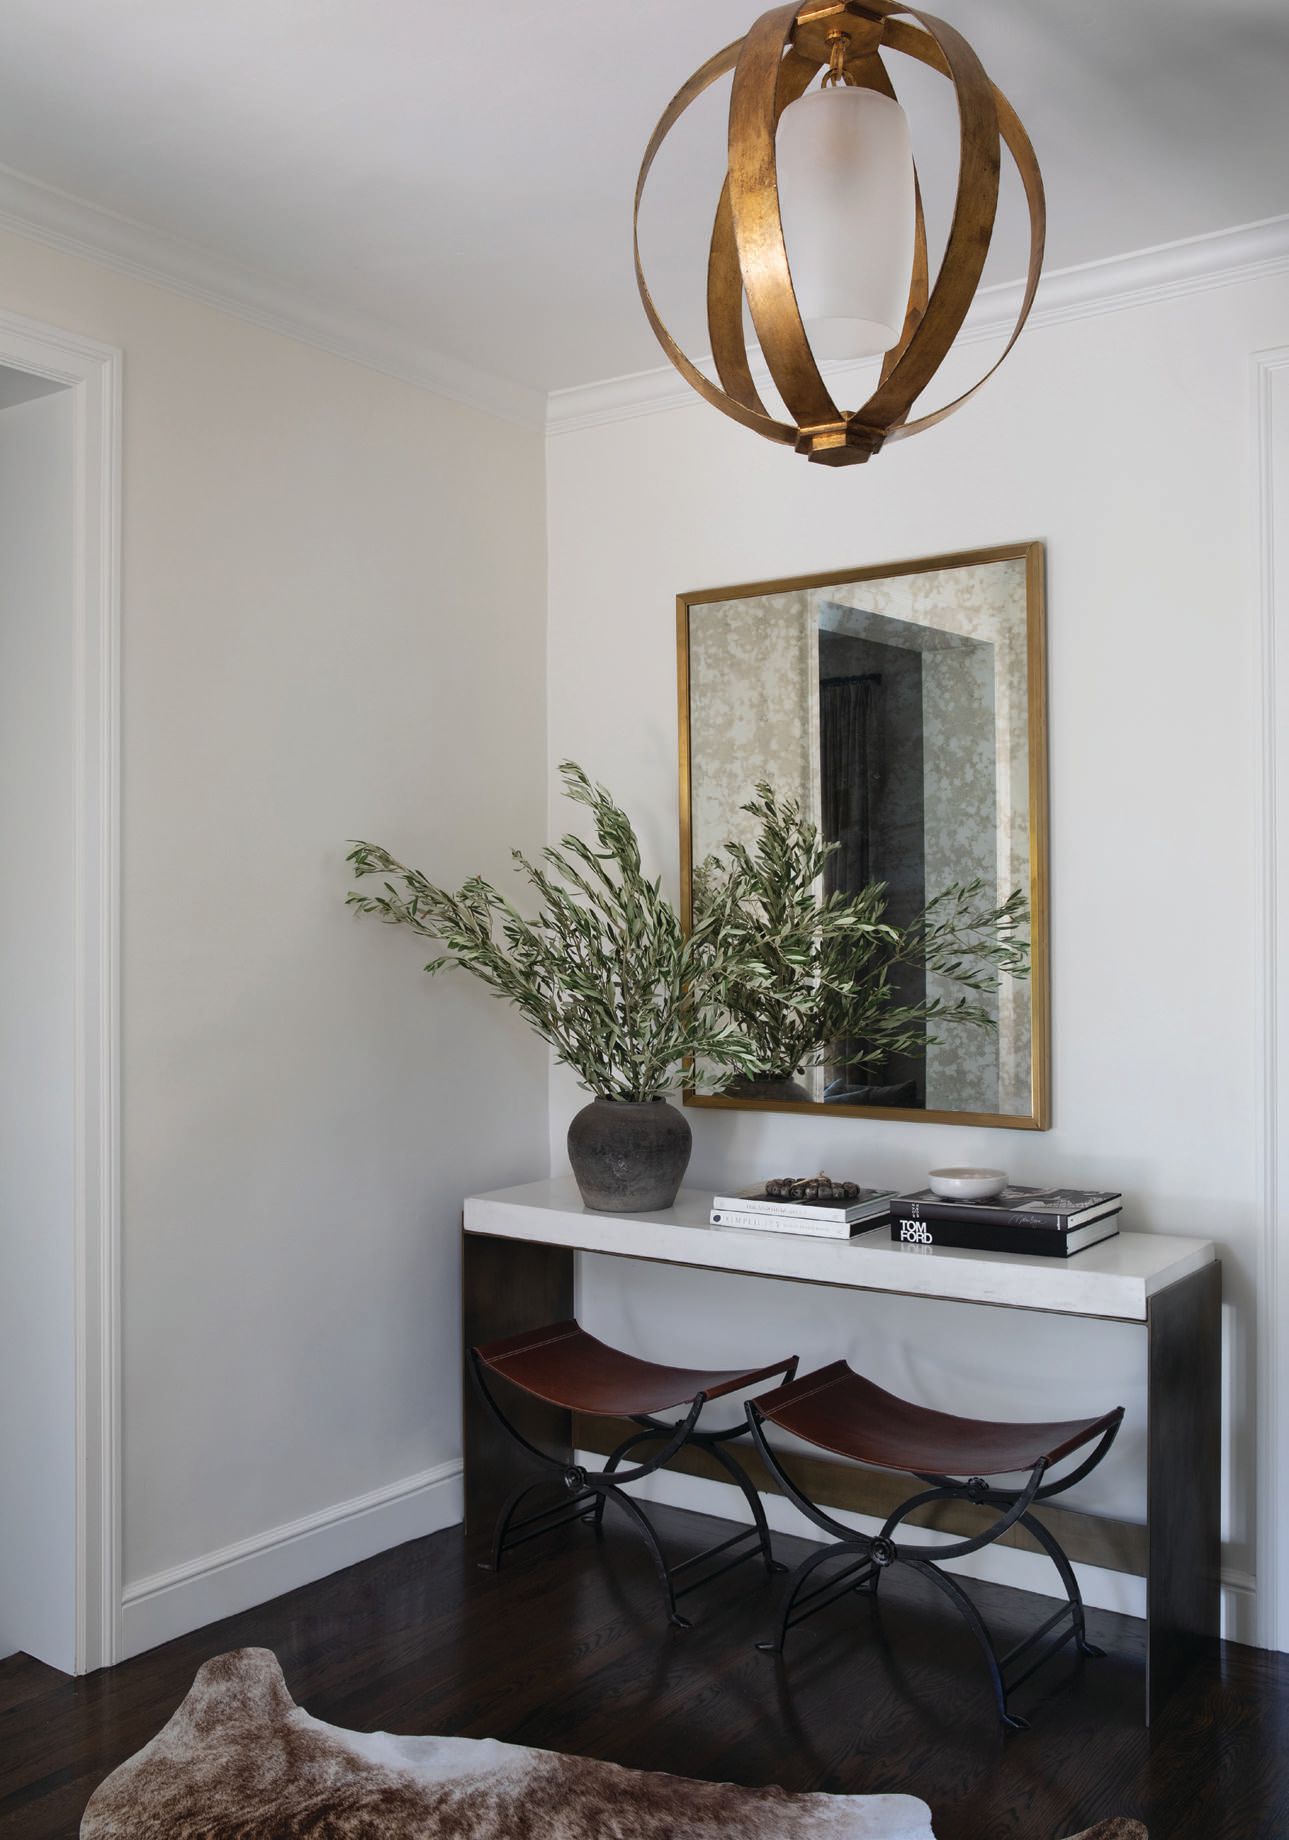 Throughout the home, Barnes transforms nooks into highly functional and gorgeous spaces. PHOTOGRAPHED BY BESS FRIDAY